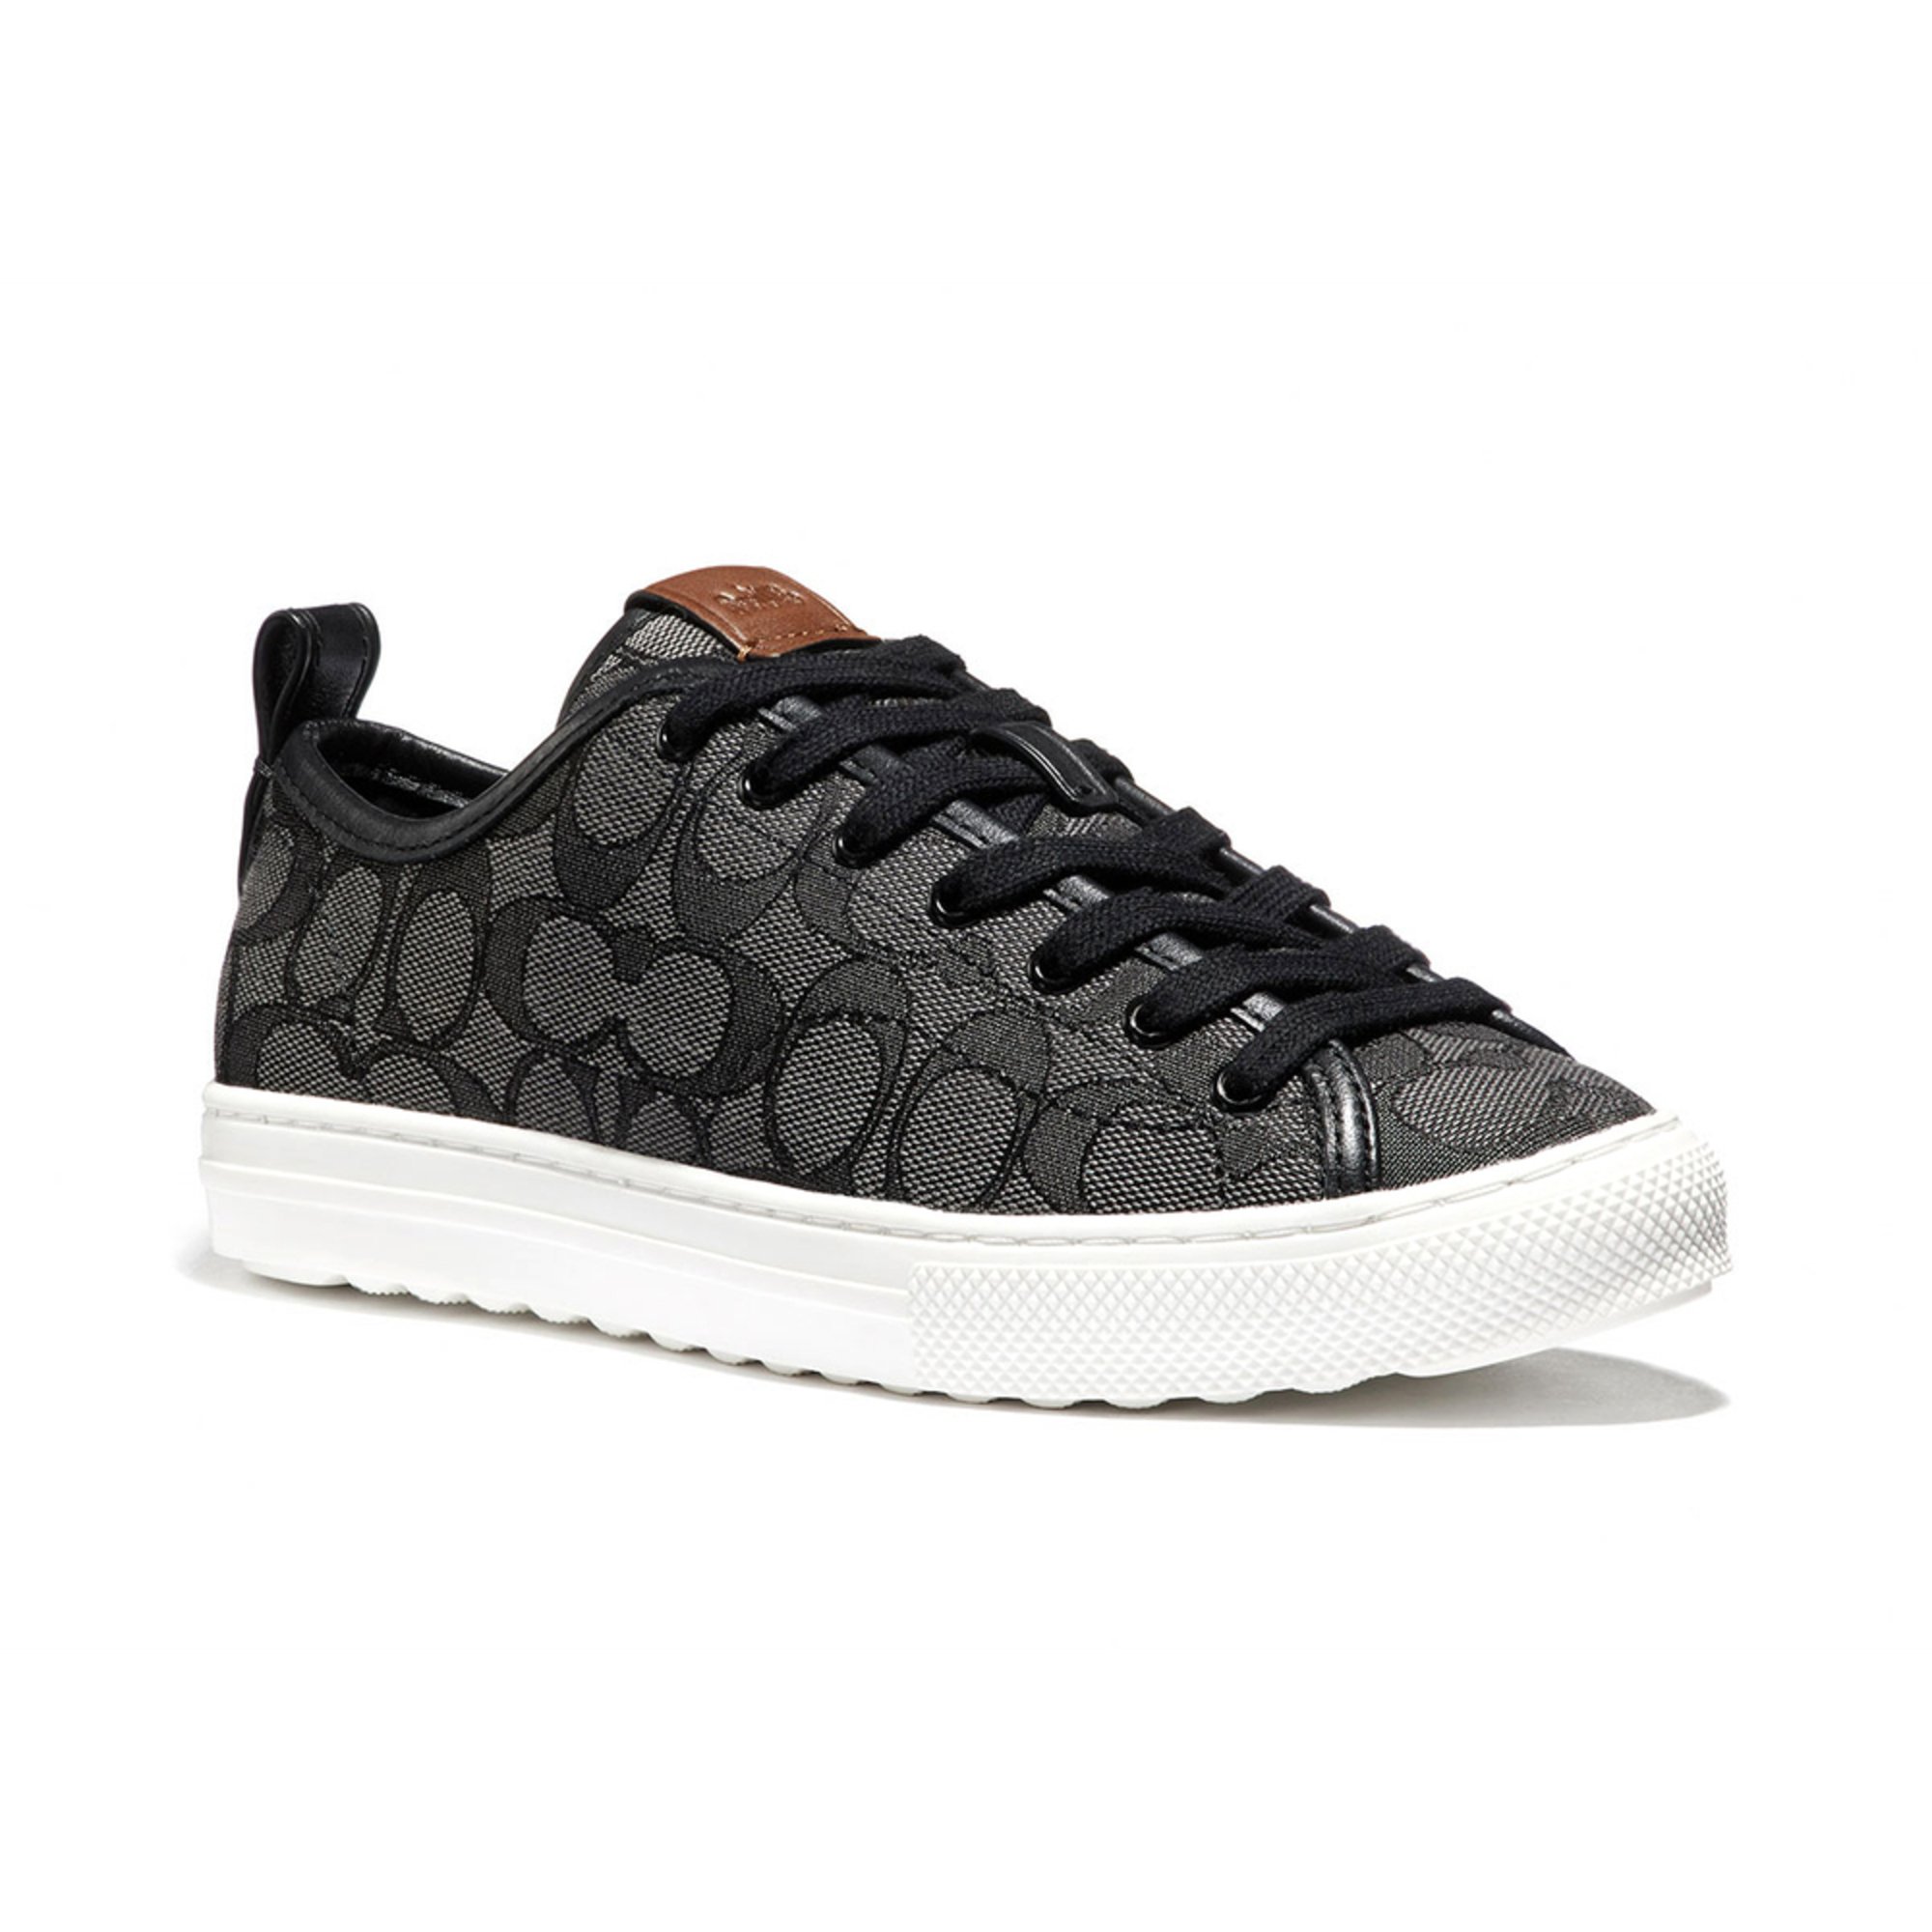 Coach Women's Signature Canvas Leather Sneaker | Fashion Sneakers ...